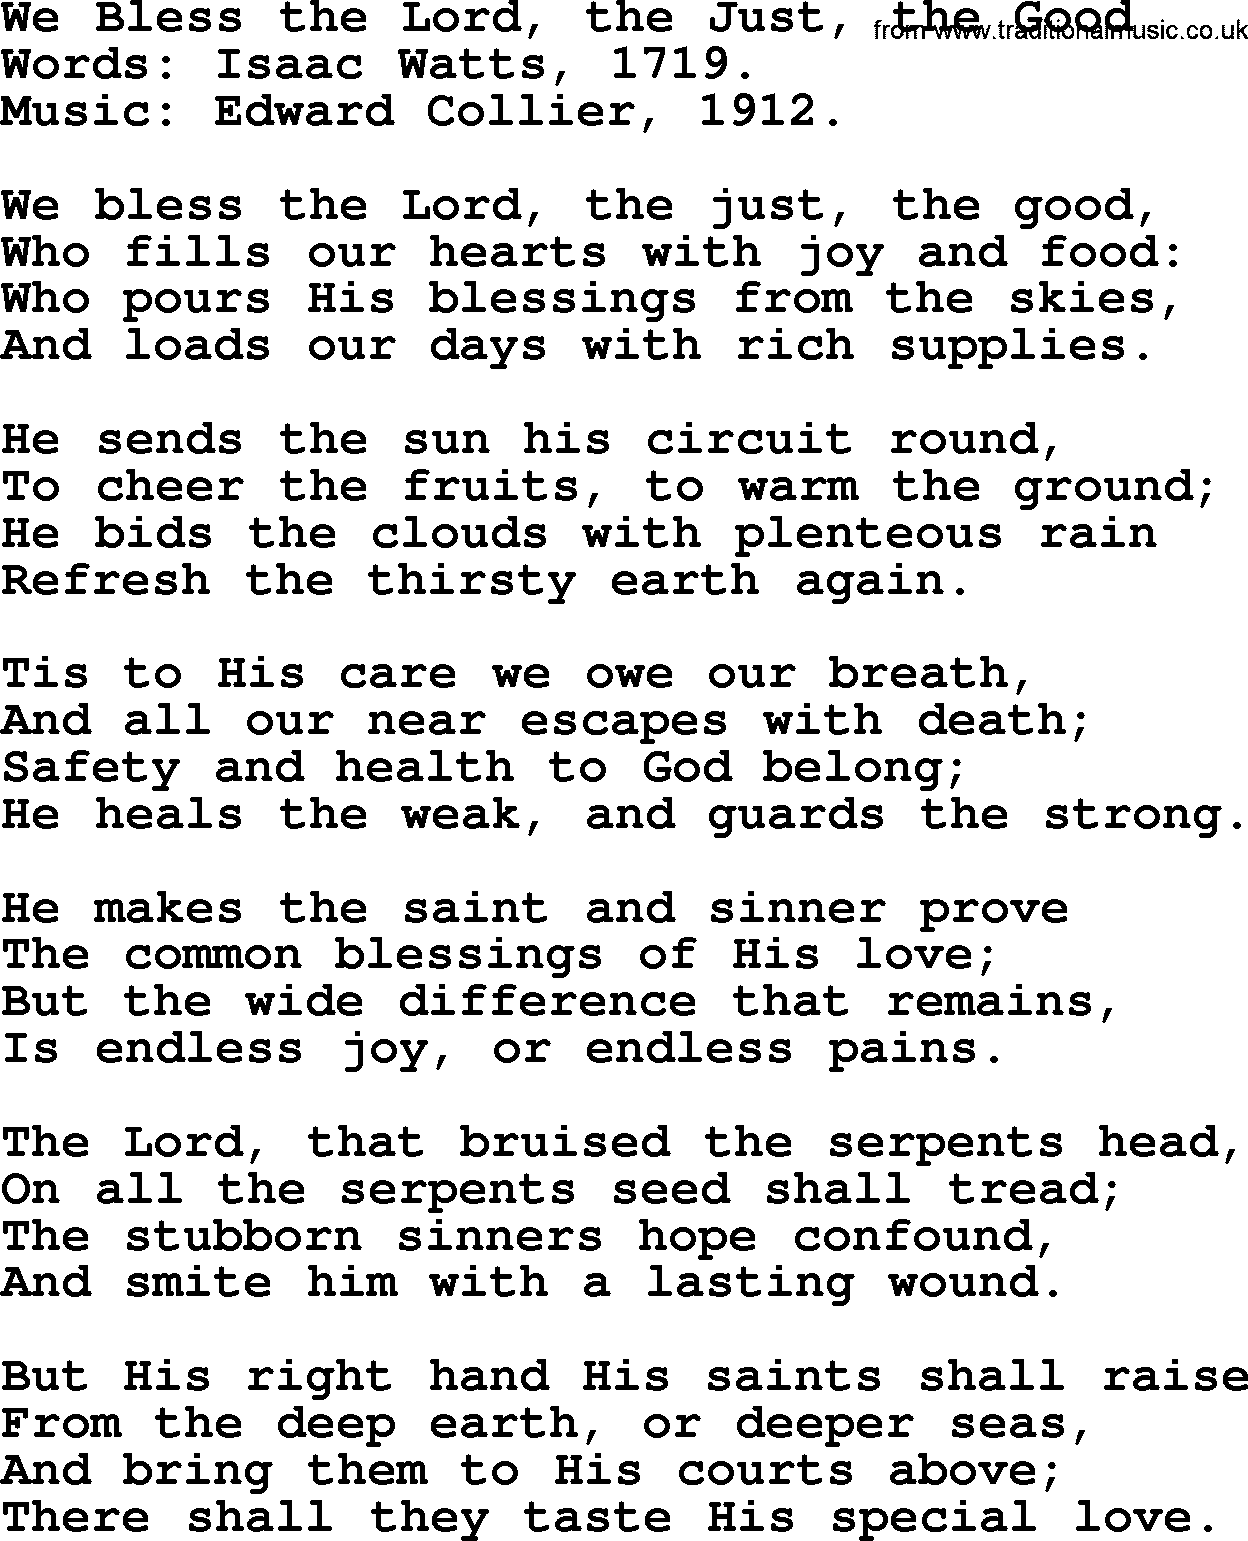 Isaac Watts Christian hymn: We Bless the Lord, the Just, the Good- lyricss